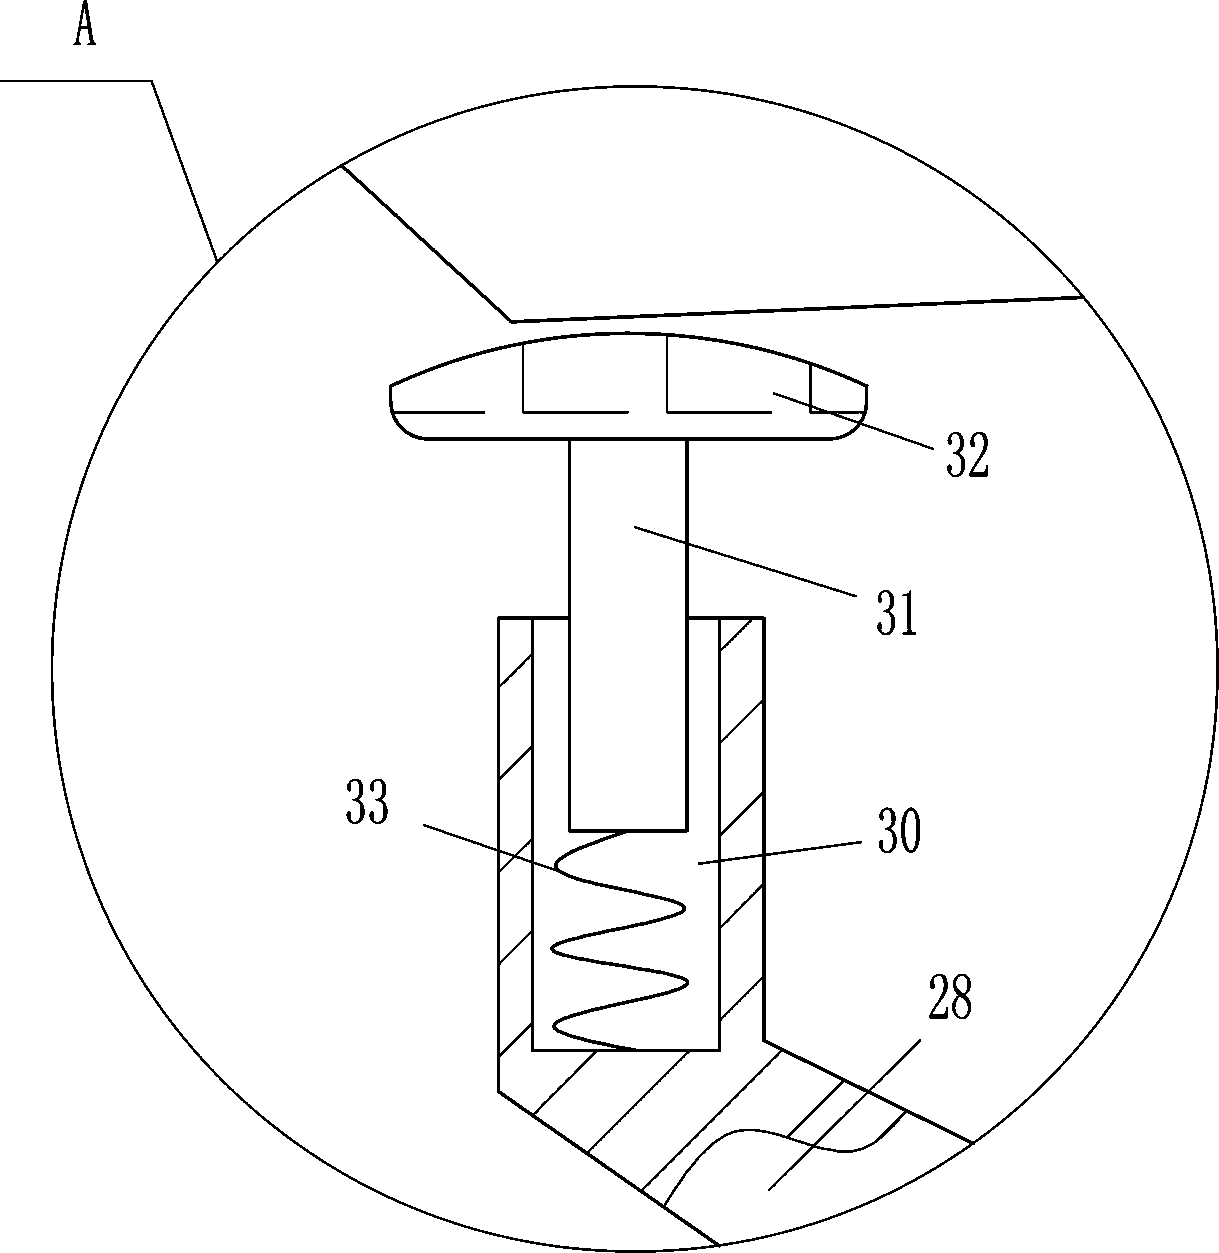 Water supplying impurity collecting device for garden pond